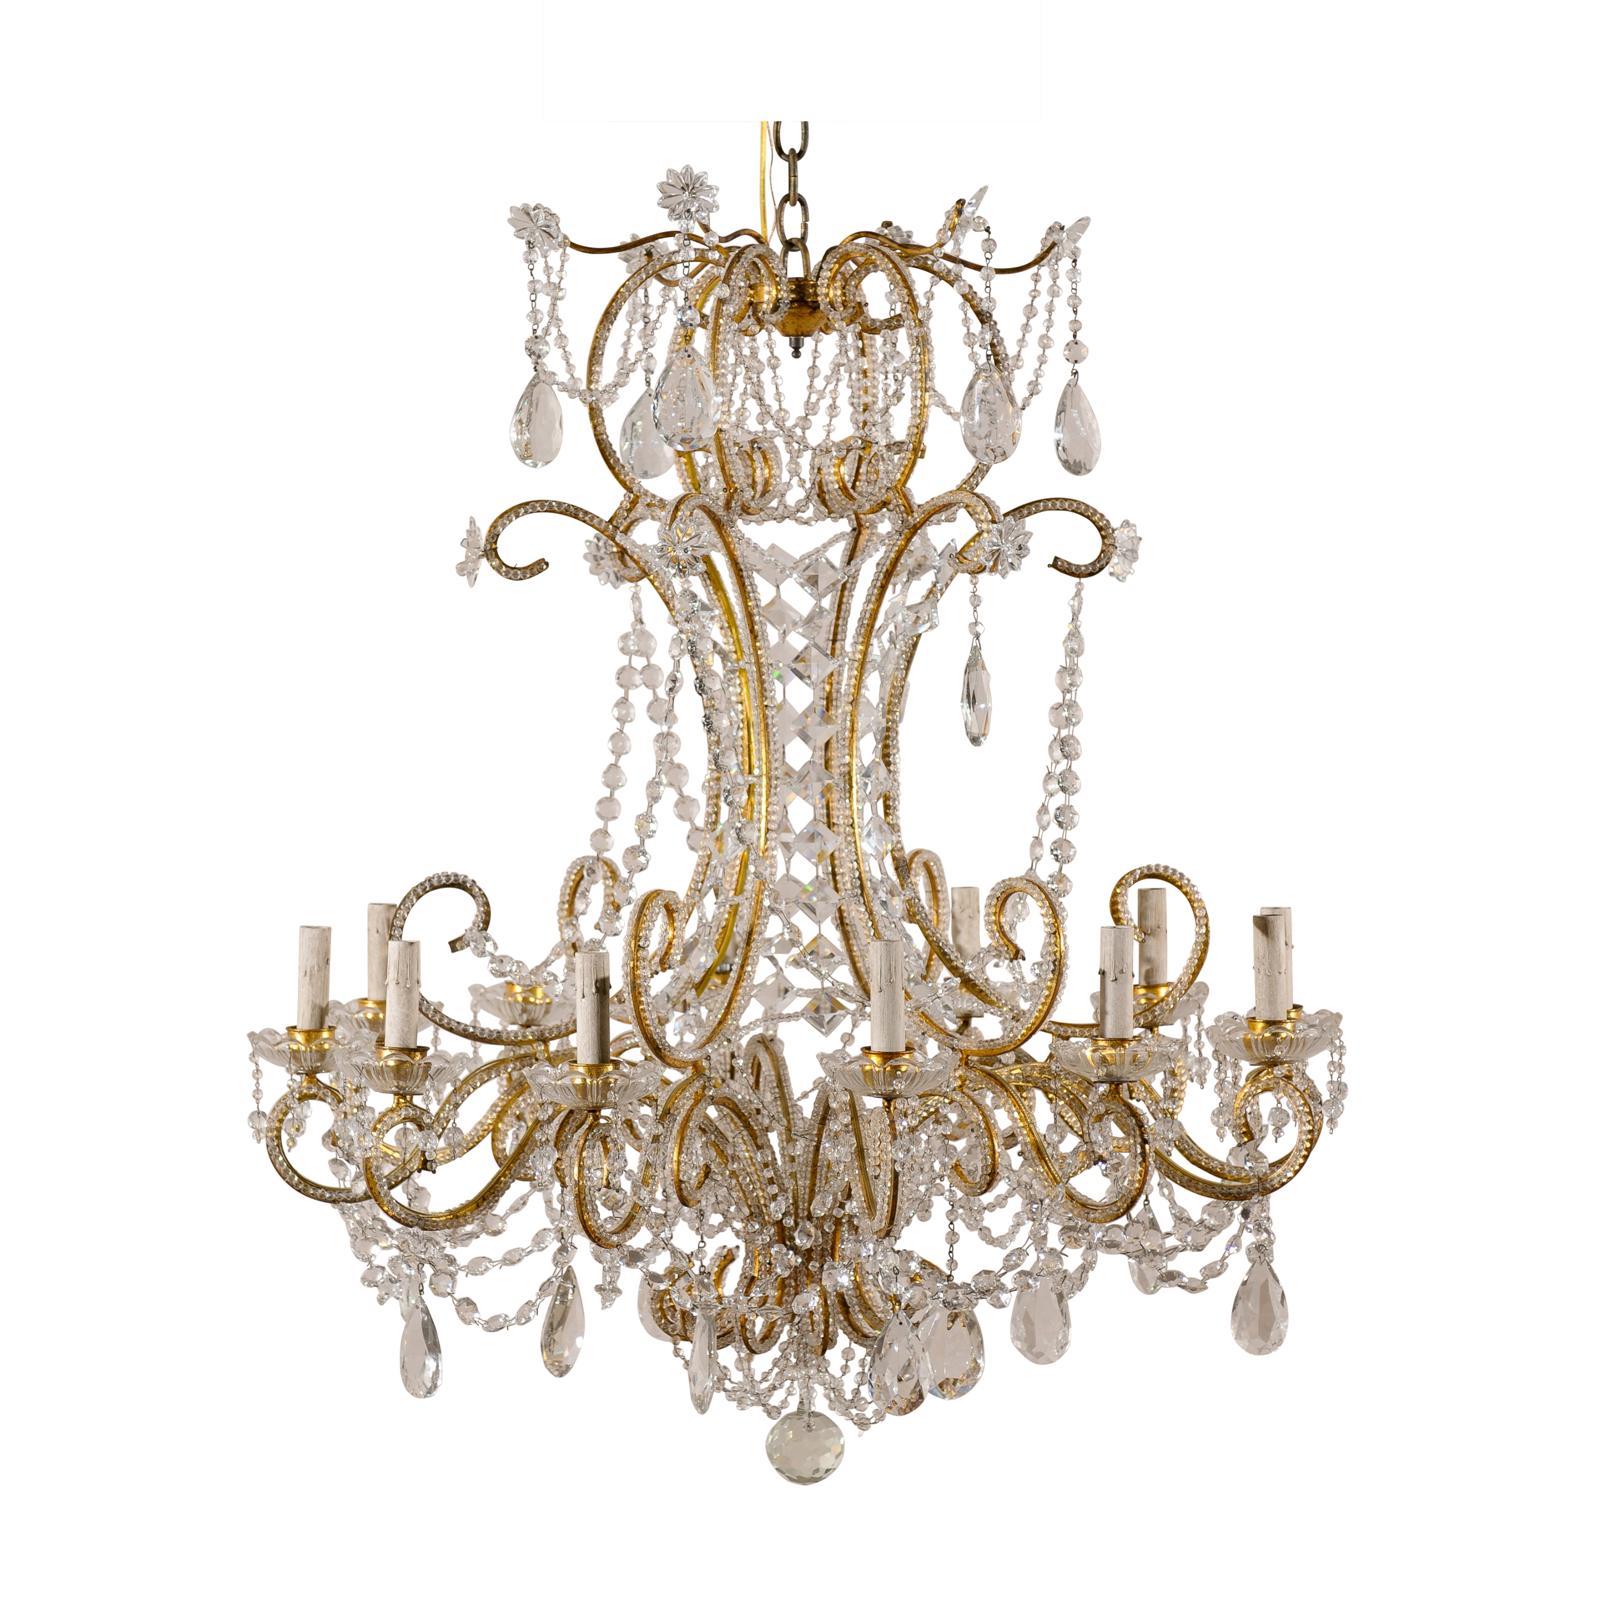 Italian Vintage Twelve-Light Crystal Chandelier with Beaded and Scrolled Arms